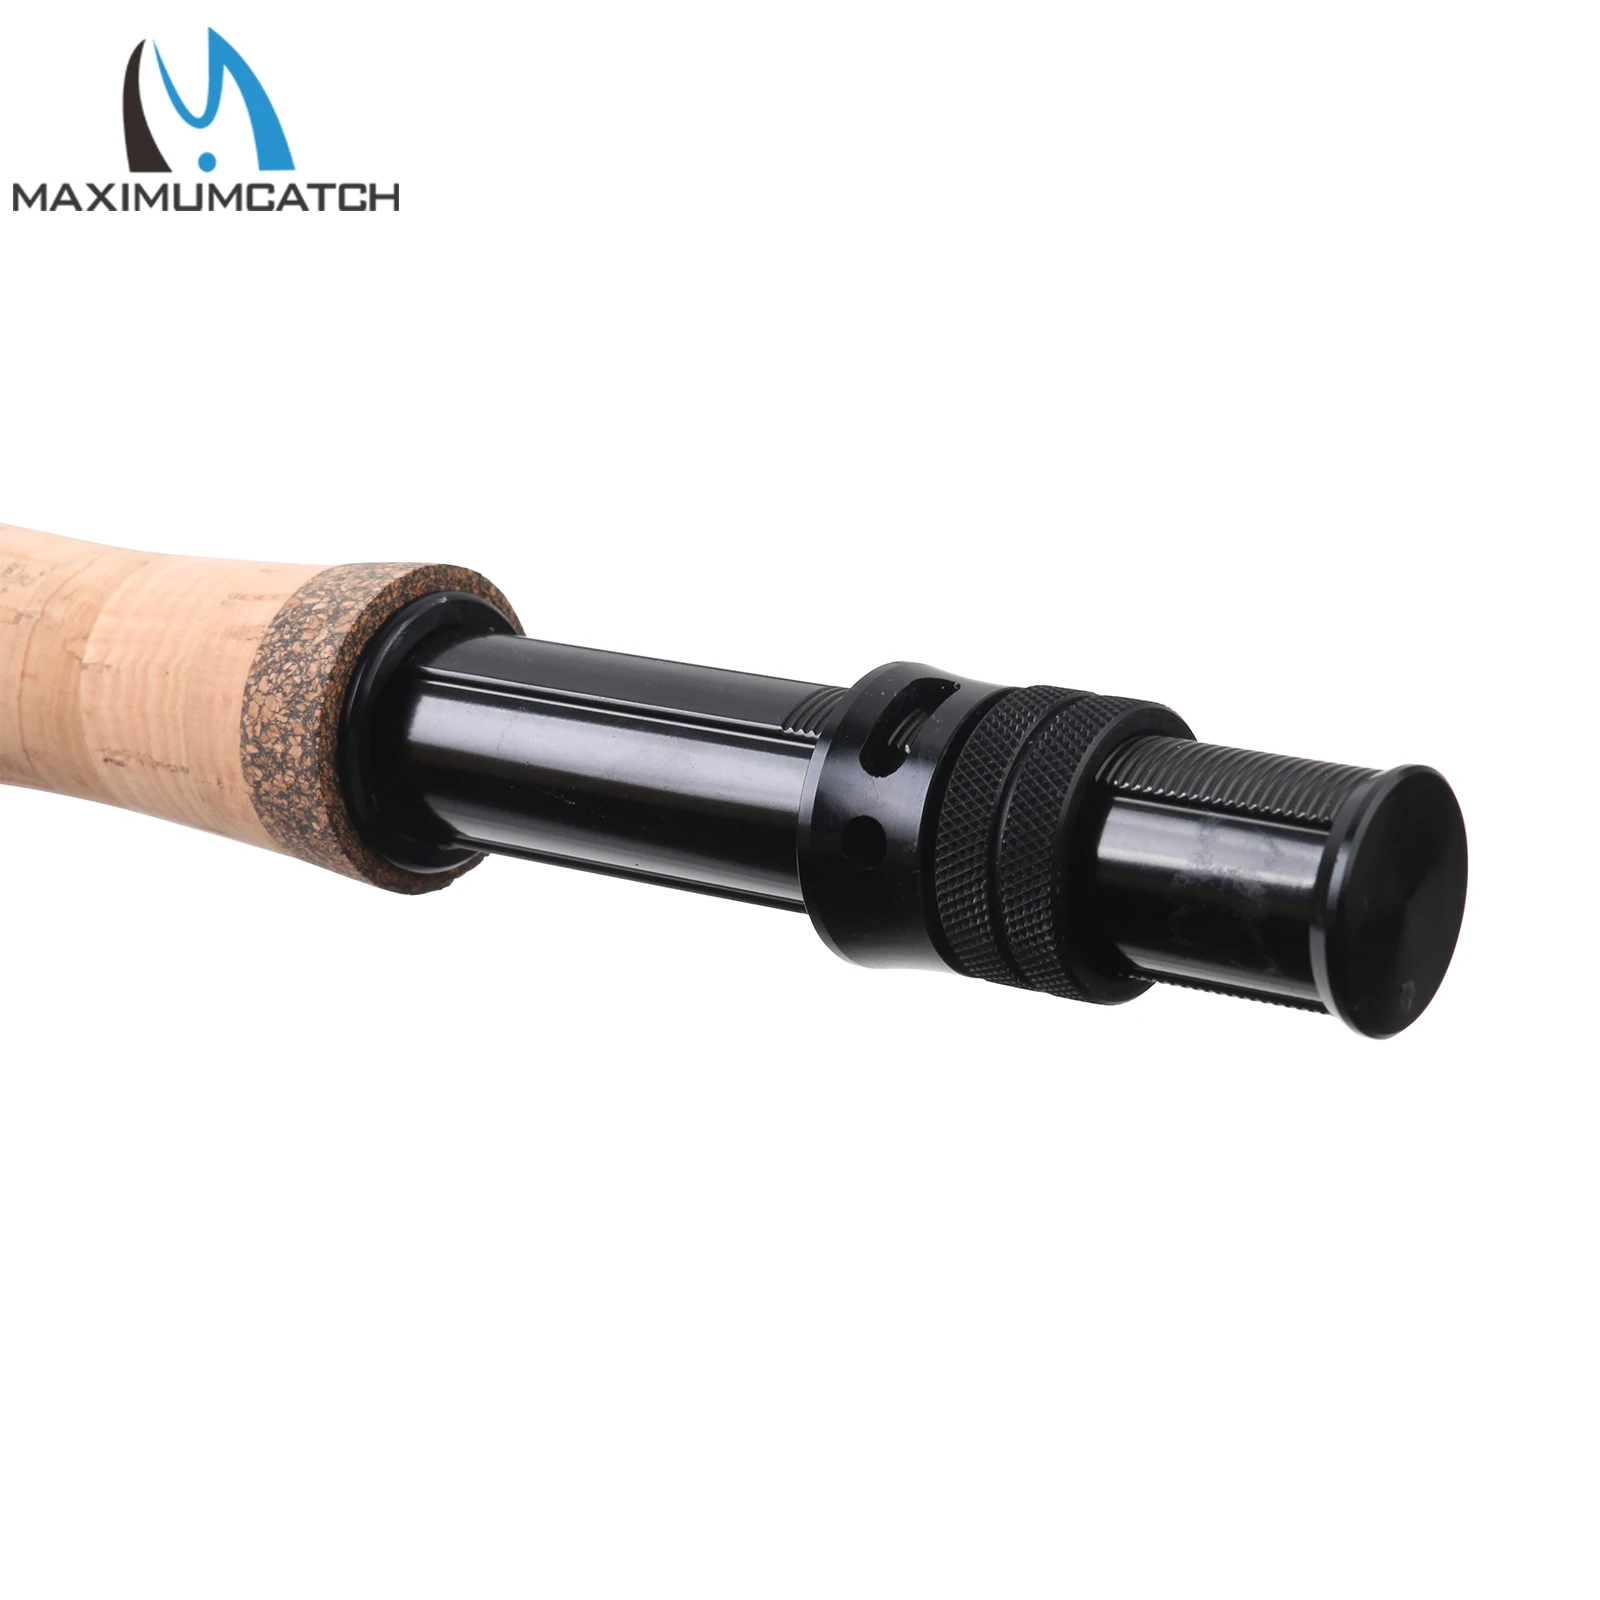 Maximumcatch 10FT-11FT 2/3/4WT 4Sec Nymph Fly Fishing Rod IM10 Graphite Carbon Fiber Fast Action Fly Rod with Nymph Line enlarge